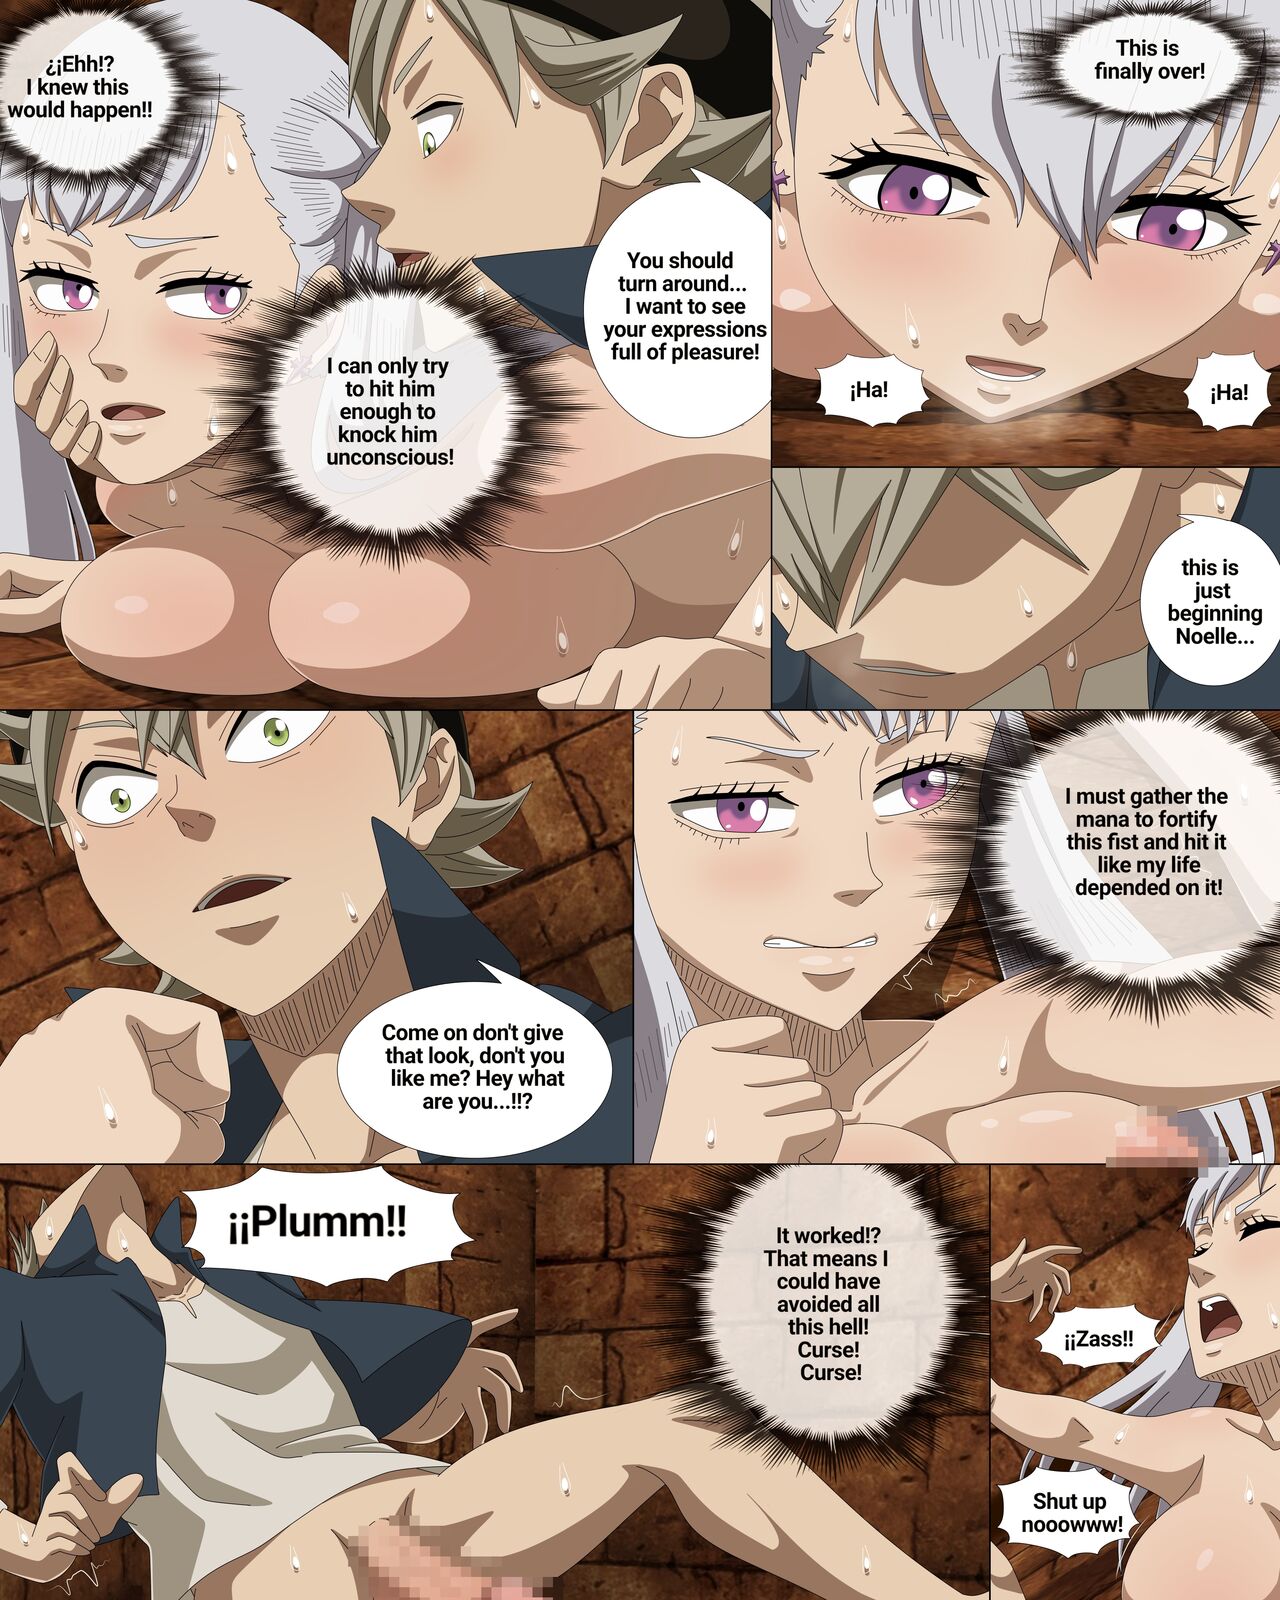 Is It Really You..noelle Black Clover 18